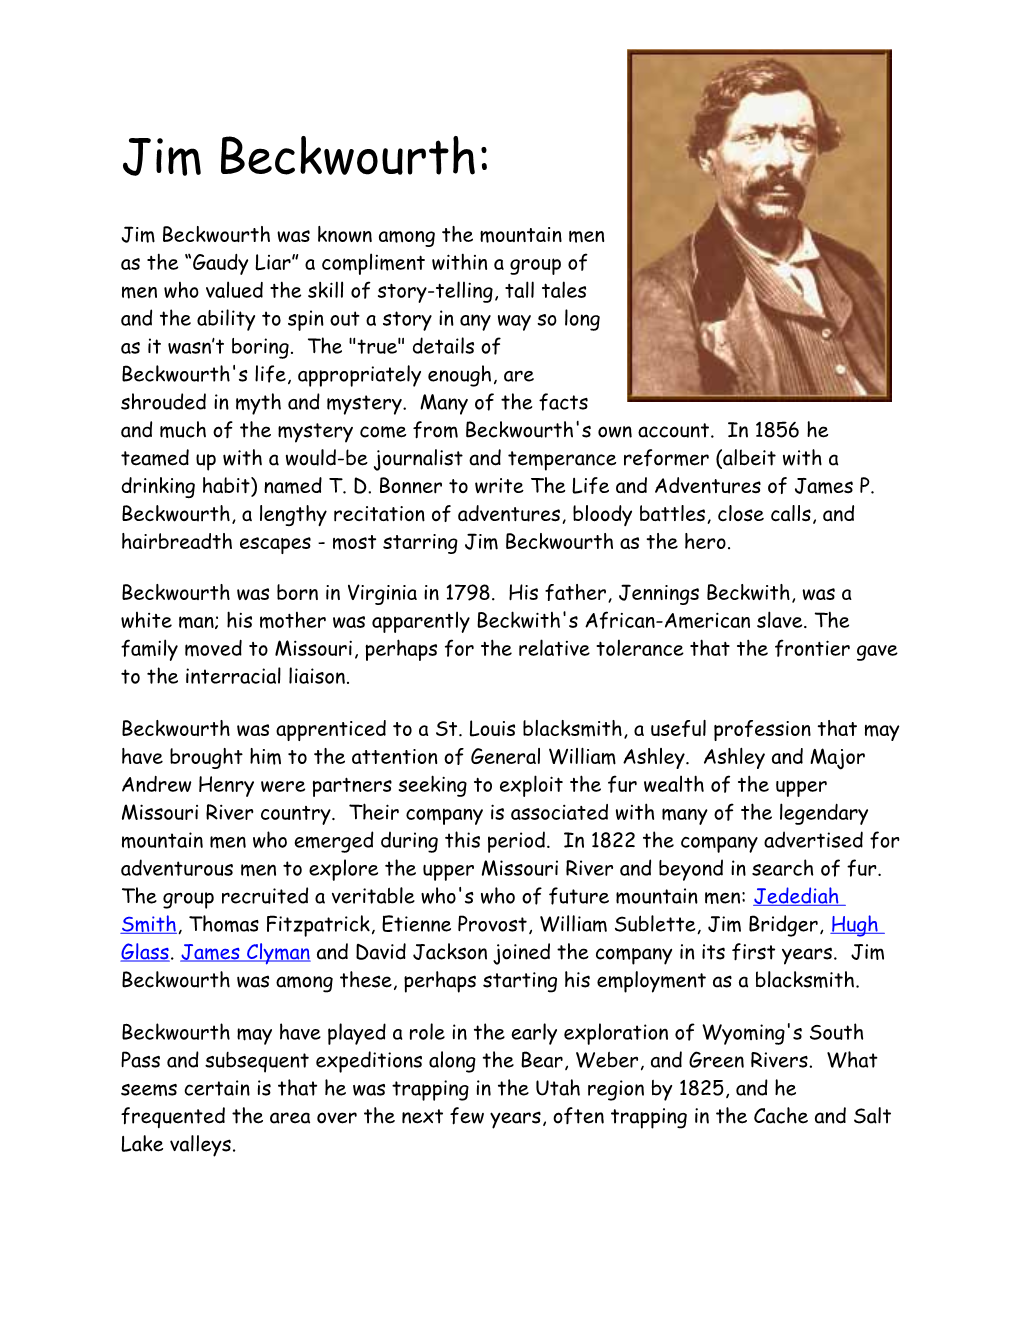 Jim Beckwourth: Jim Beckwourth Was Known Among the Mountain Men As the Gaudy Liar a Compliment